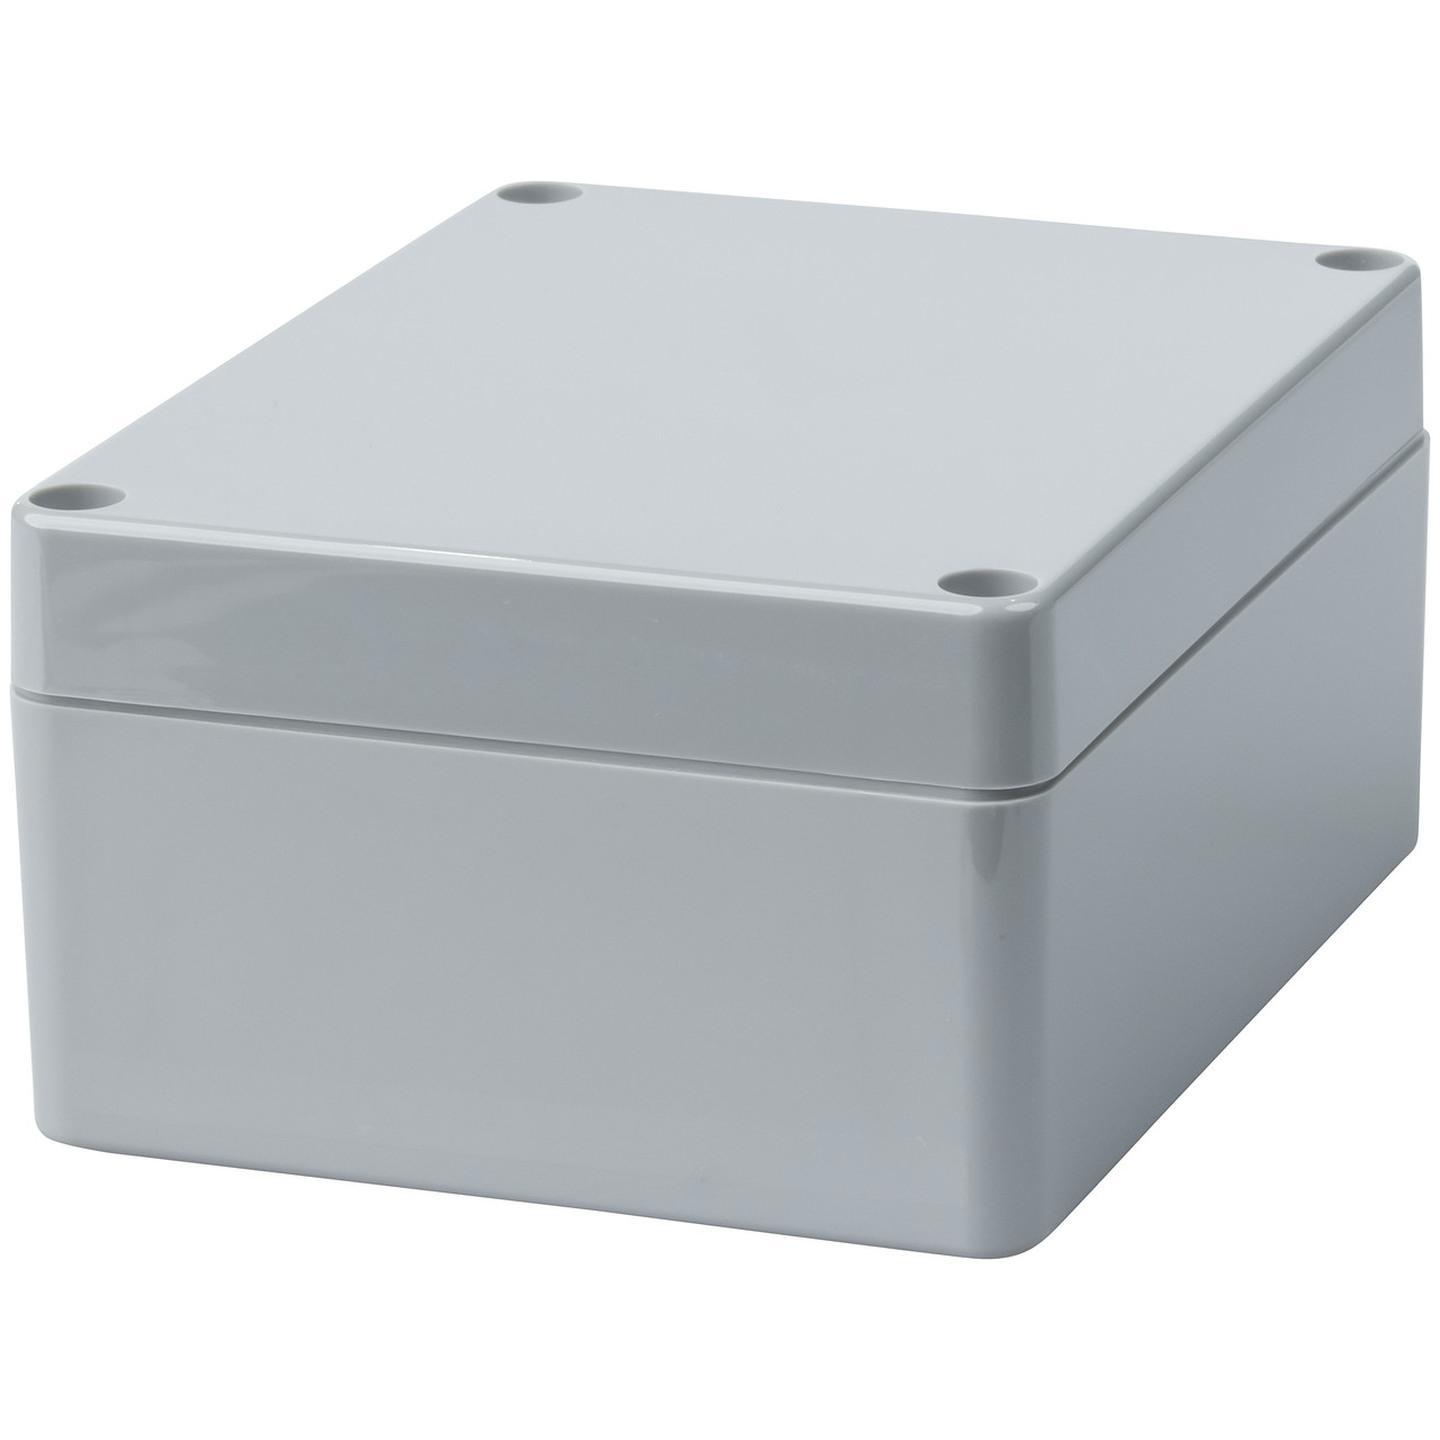 Sealed ABS Enclosure - 115 x 90 x 55mm